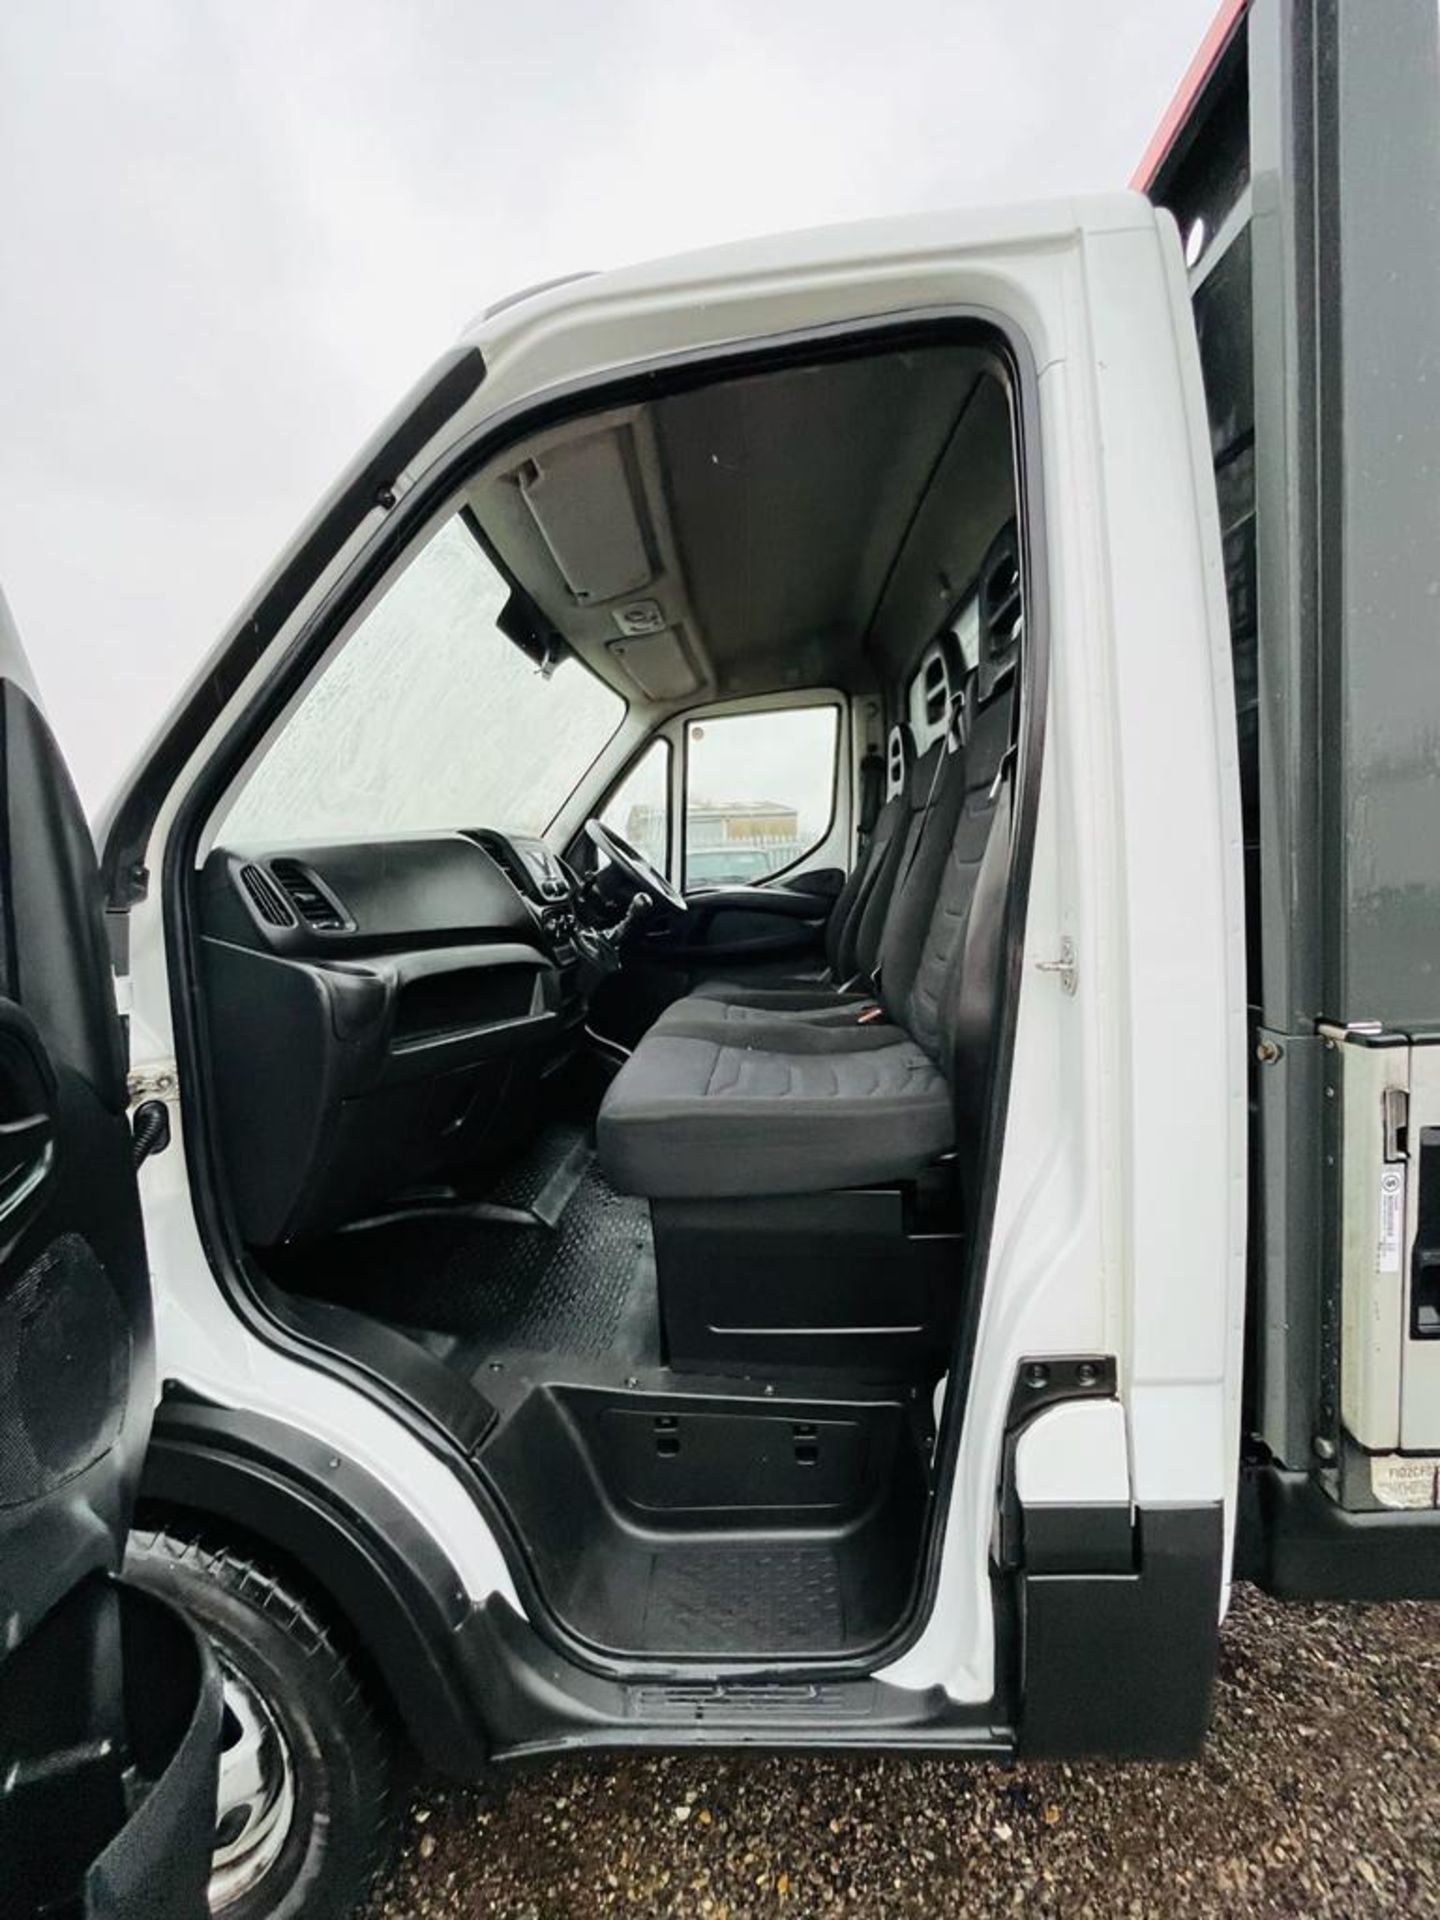 ** ON SALE **Iveco Daily 35C14 2.3 HPI 2018 '68 Reg' Alloy Dropside - ULEZ Compliant - Image 16 of 20